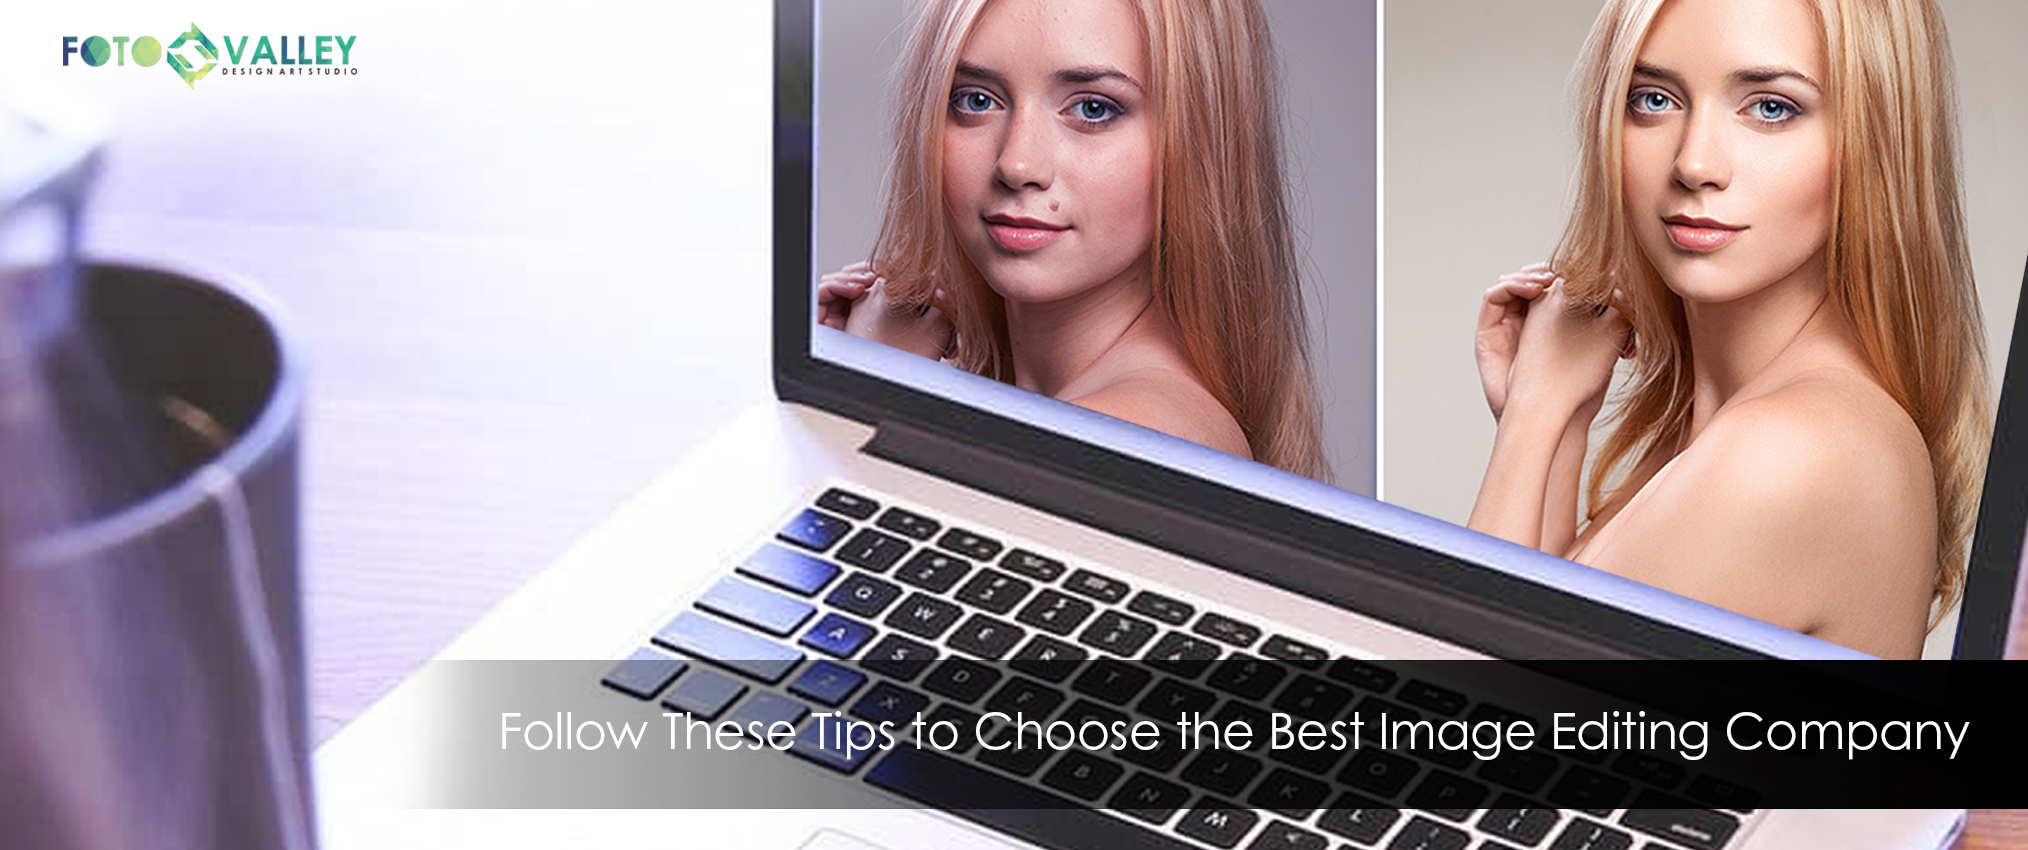 Follow These Tips to Choose the Best Image Editing Company